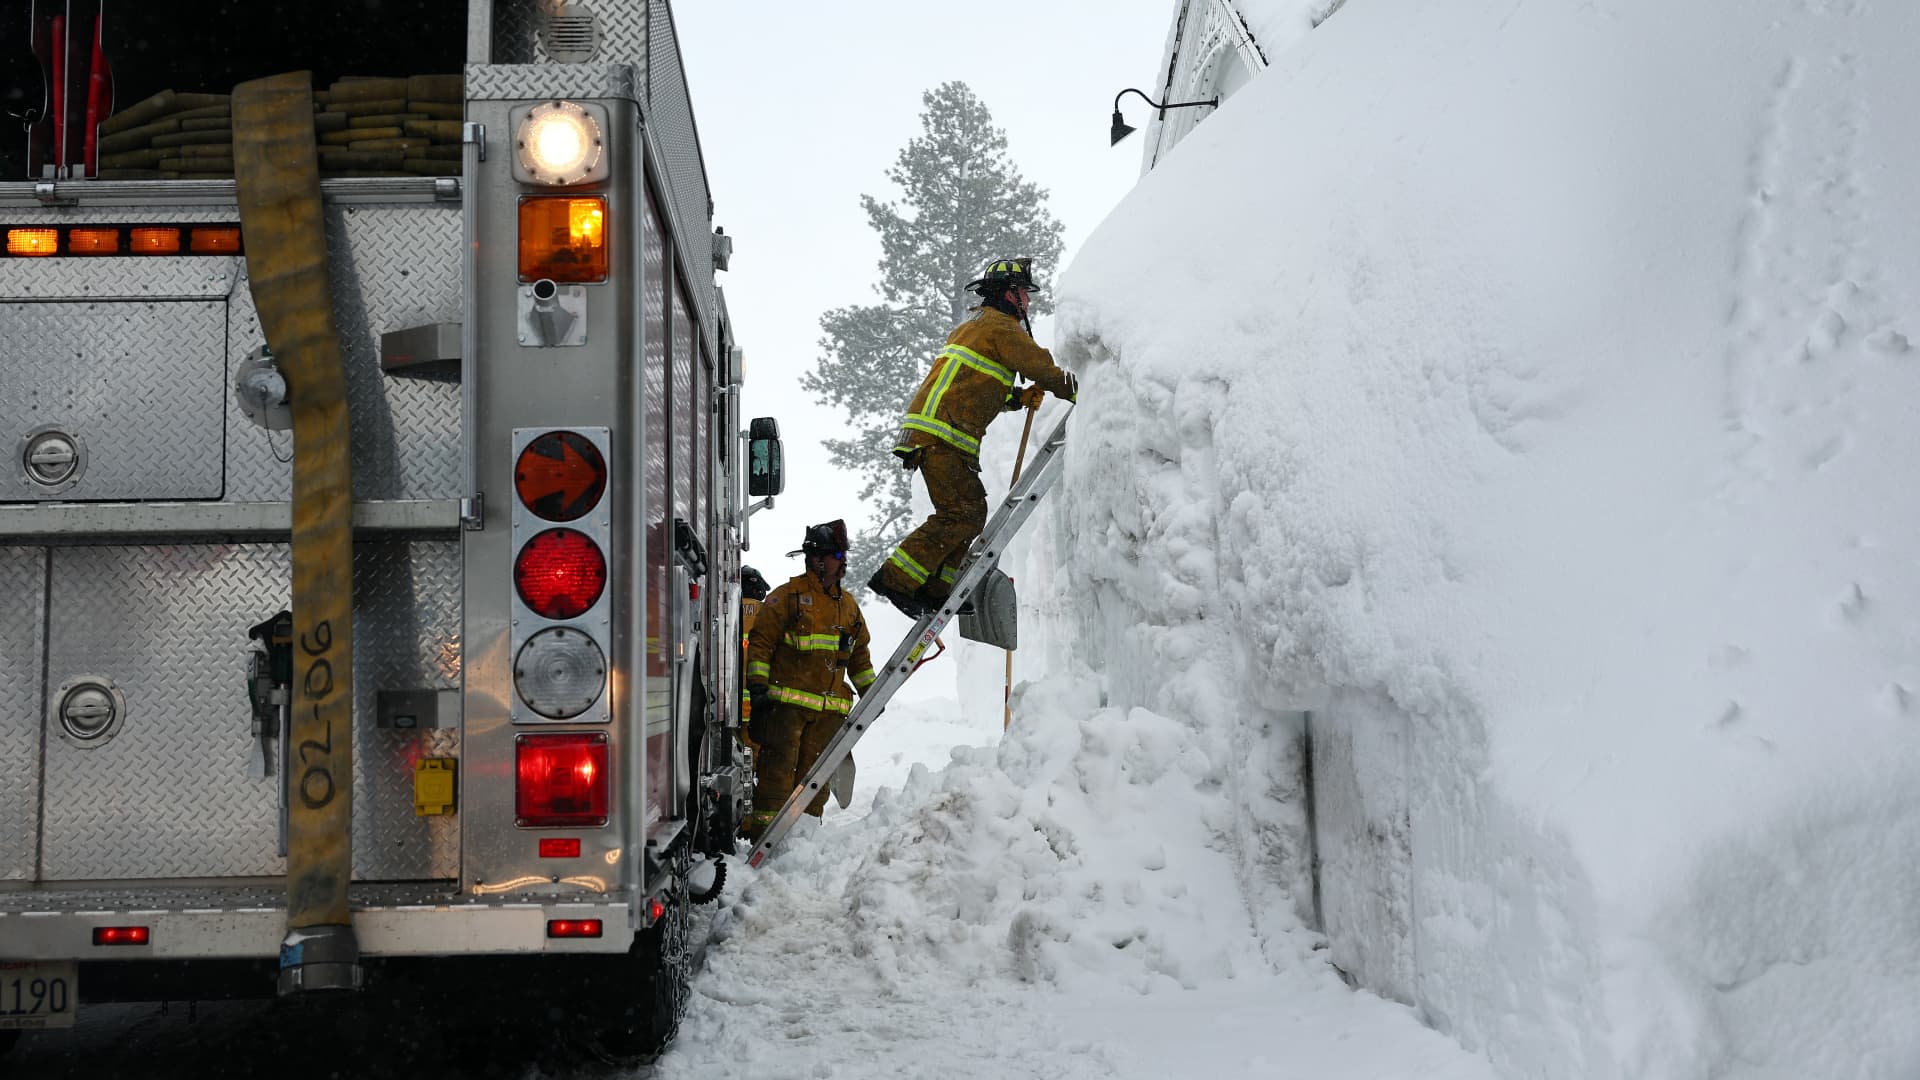 Mammoth Lakes Fire Department firefighters respond to a propane heater leak and small fire at a shuttered restaurant surrounded by snowbanks on March 12, 2023 in Mammoth Lakes, California. 